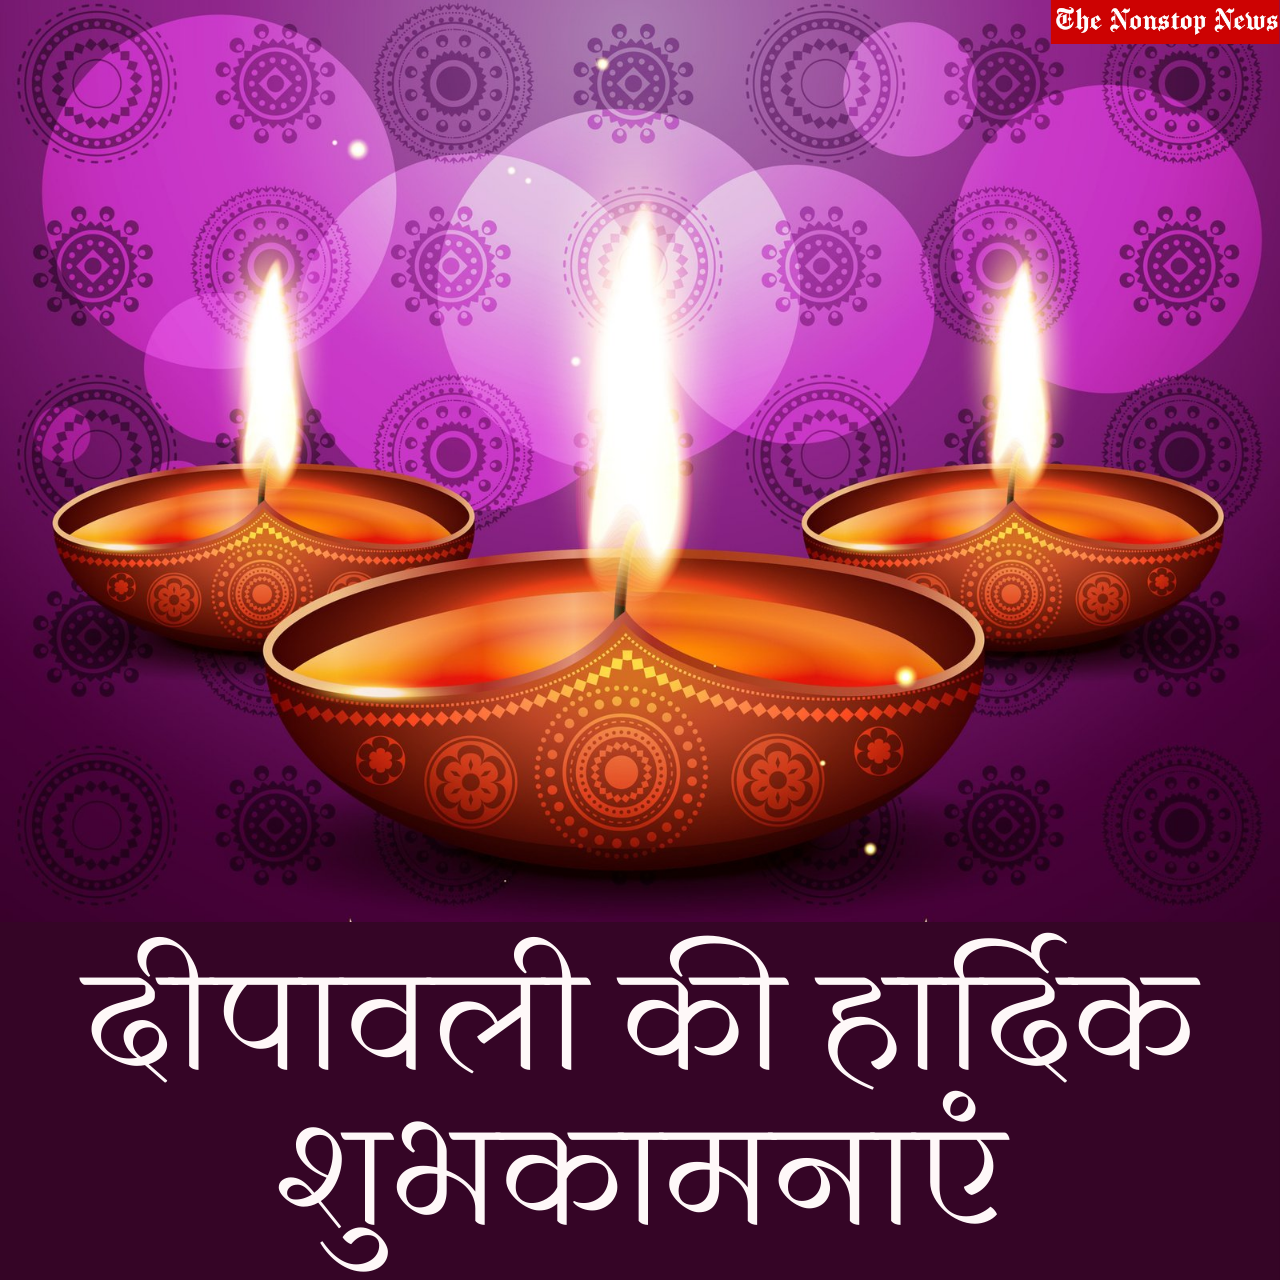 Happy Diwali 2021 Hindi Wishes, Greetings, Shayari, HD Images, Quotes, and Messages to Share